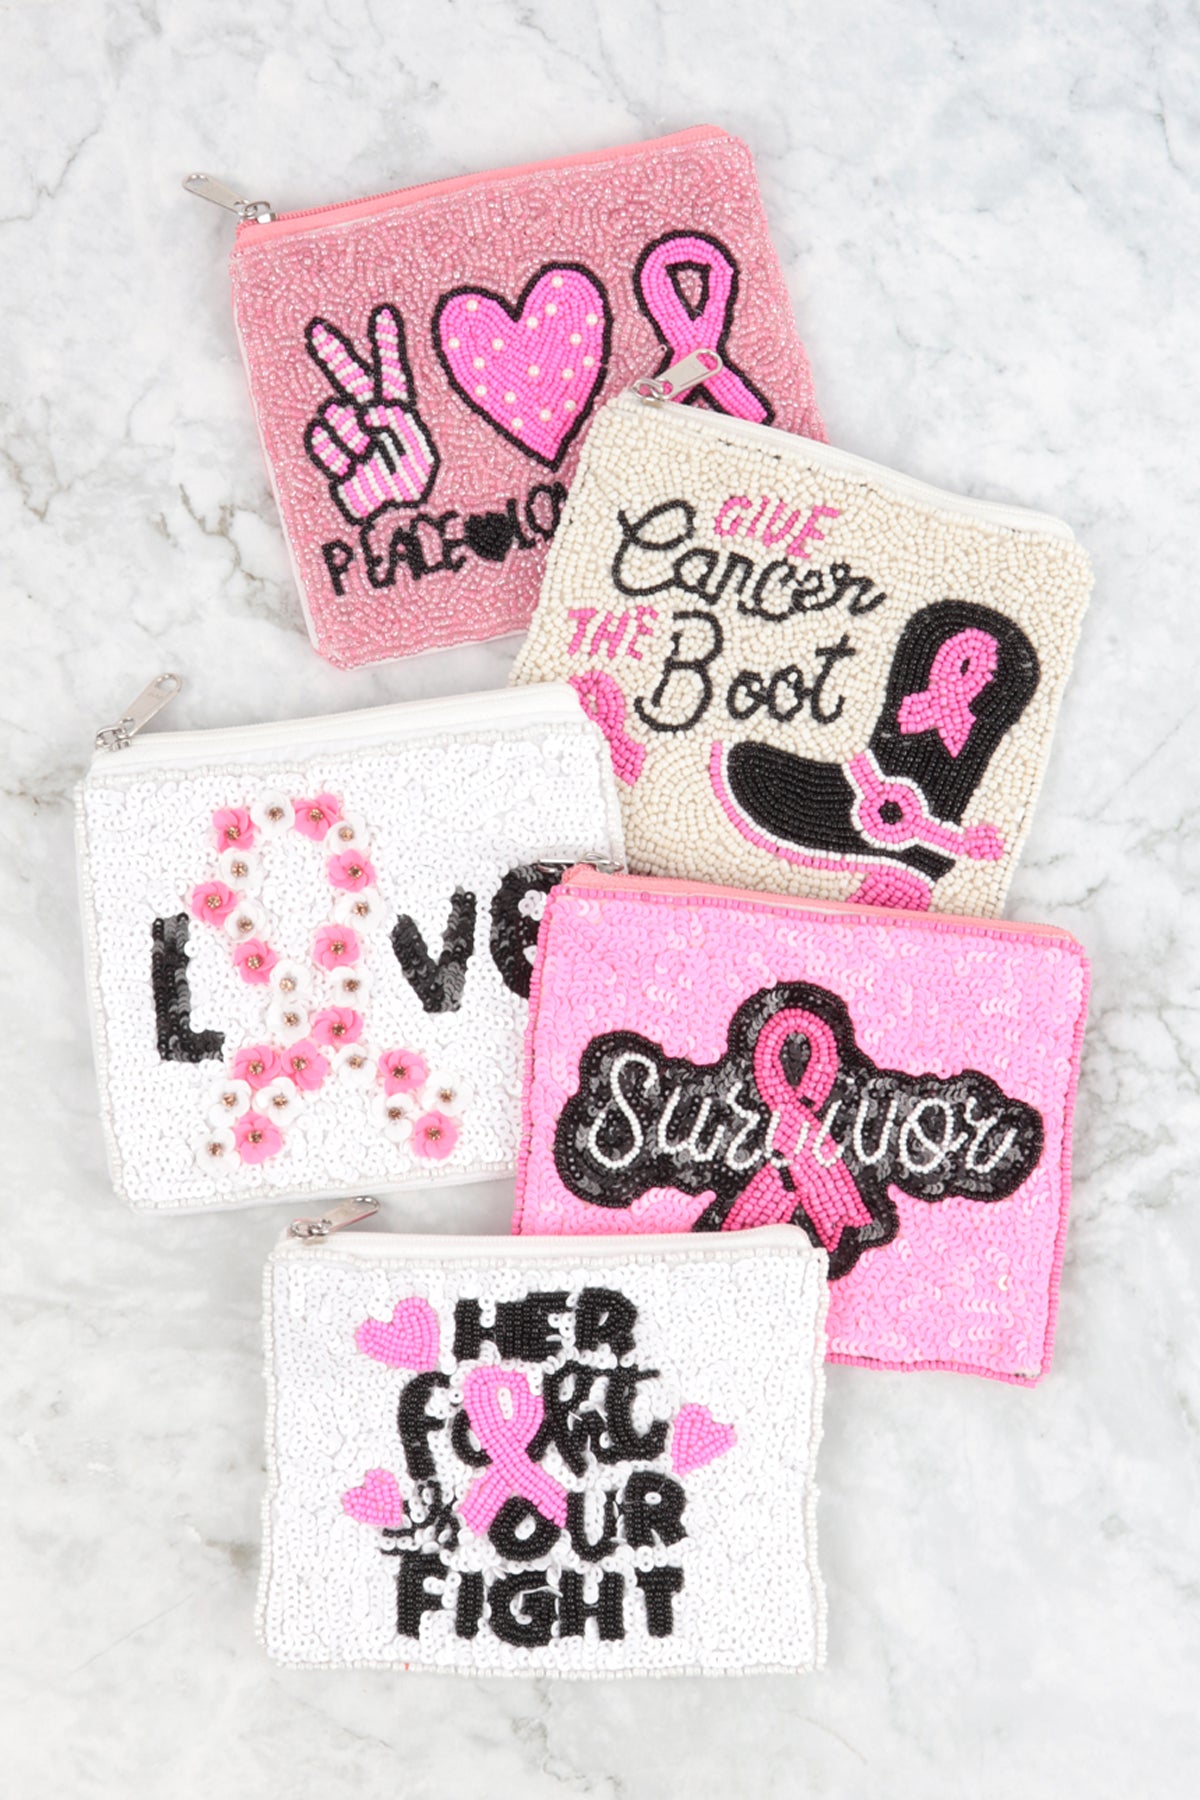 GIVE CANCER THE BOOT PINK RIBBON AWARENESS SEED BEADS COIN POUCH-CREAM